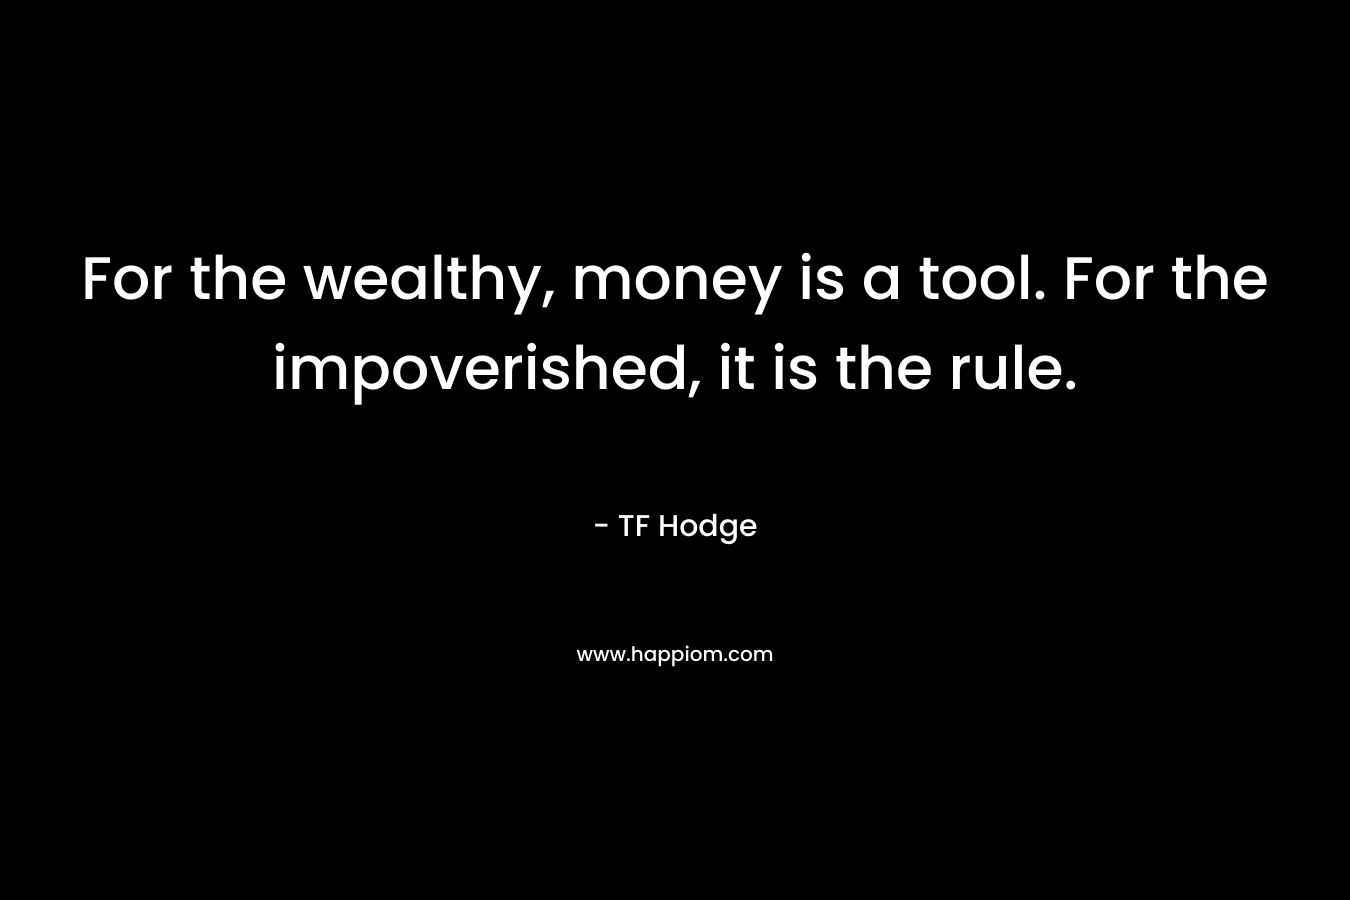 For the wealthy, money is a tool. For the impoverished, it is the rule.